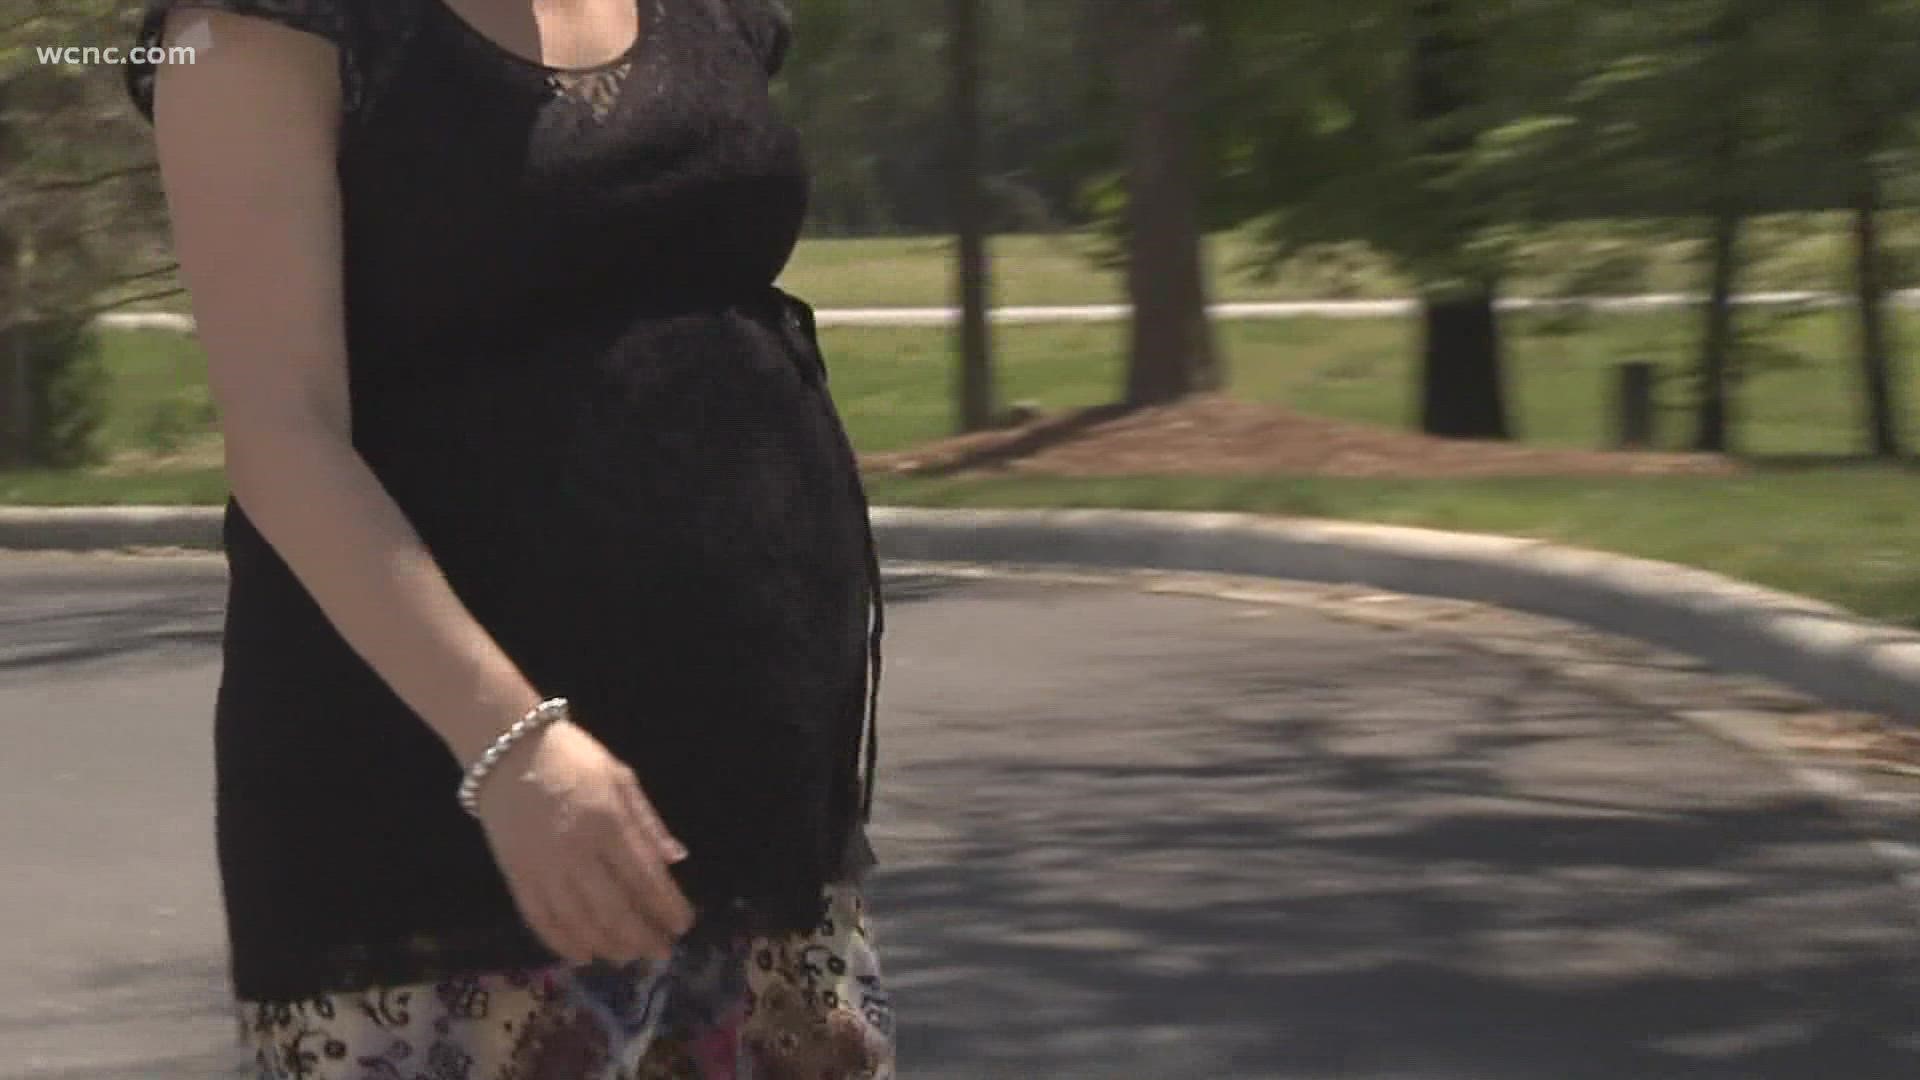 At a news conference Tuesday morning, advocates said around 800 stillbirths happen every year in North Carolina.